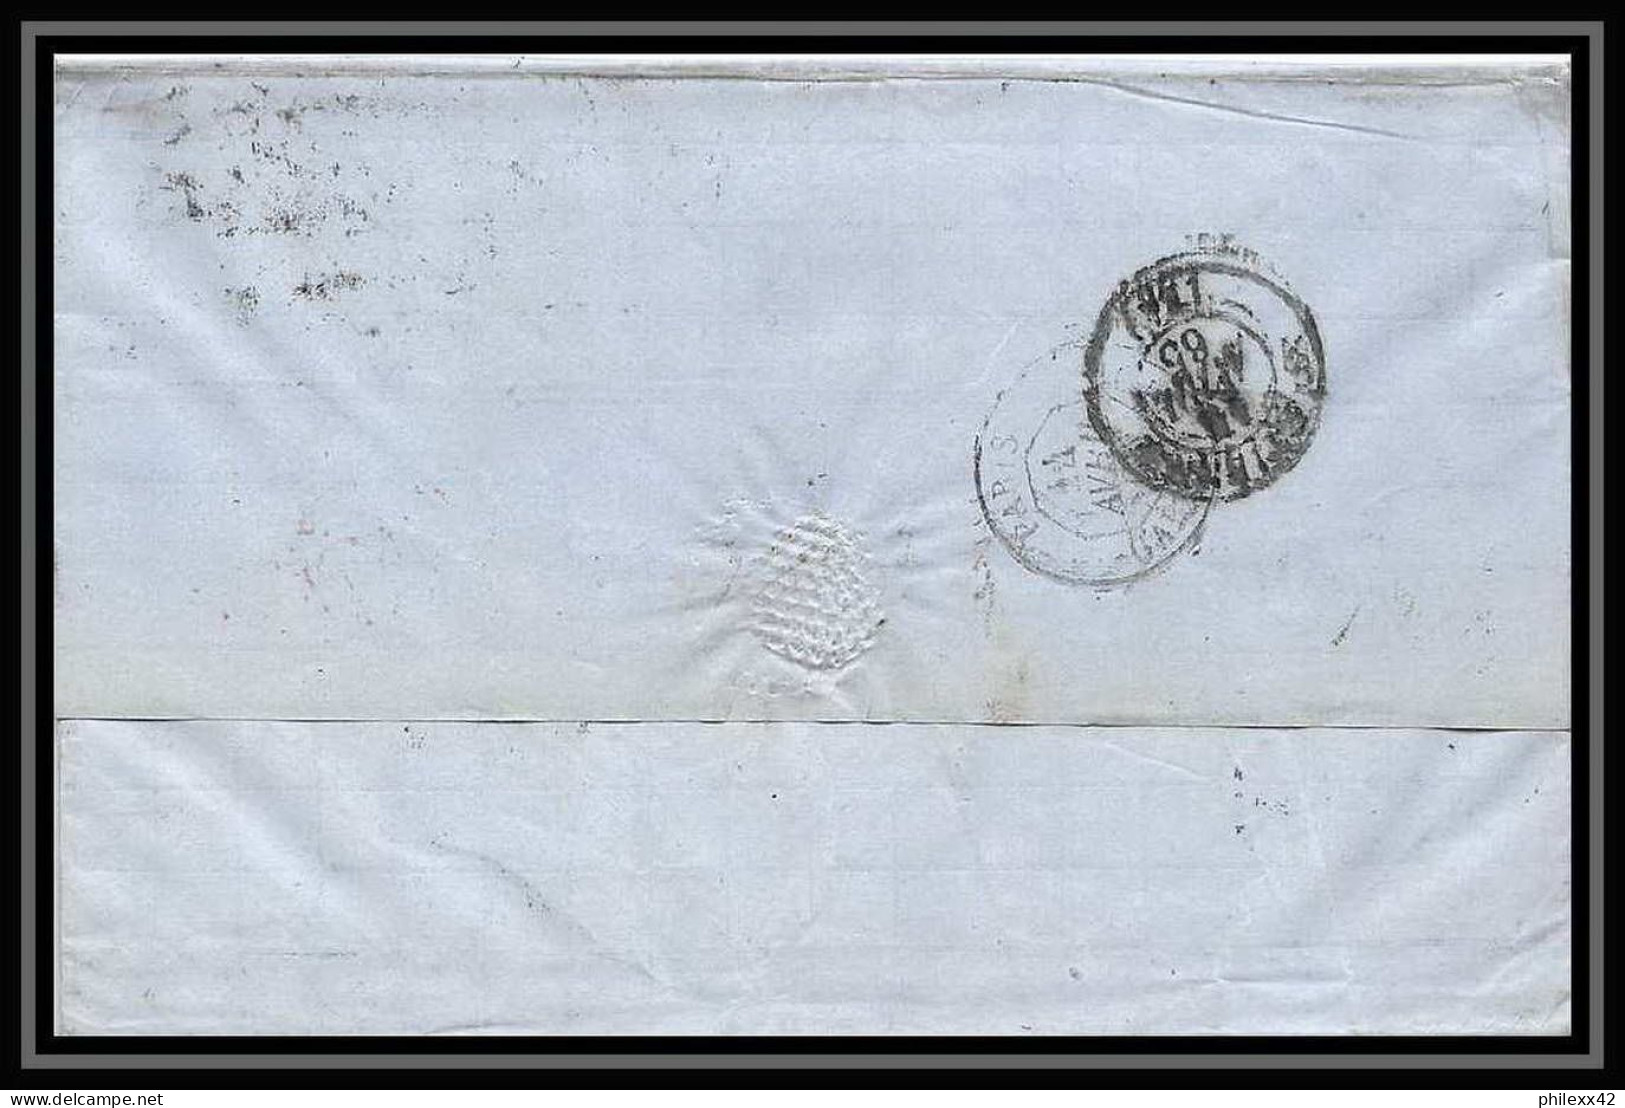 35731 N°32 Victoria 4p Red London St Etienne France 1865 Cachet 76 Lettre Cover Grande Bretagne England - Covers & Documents